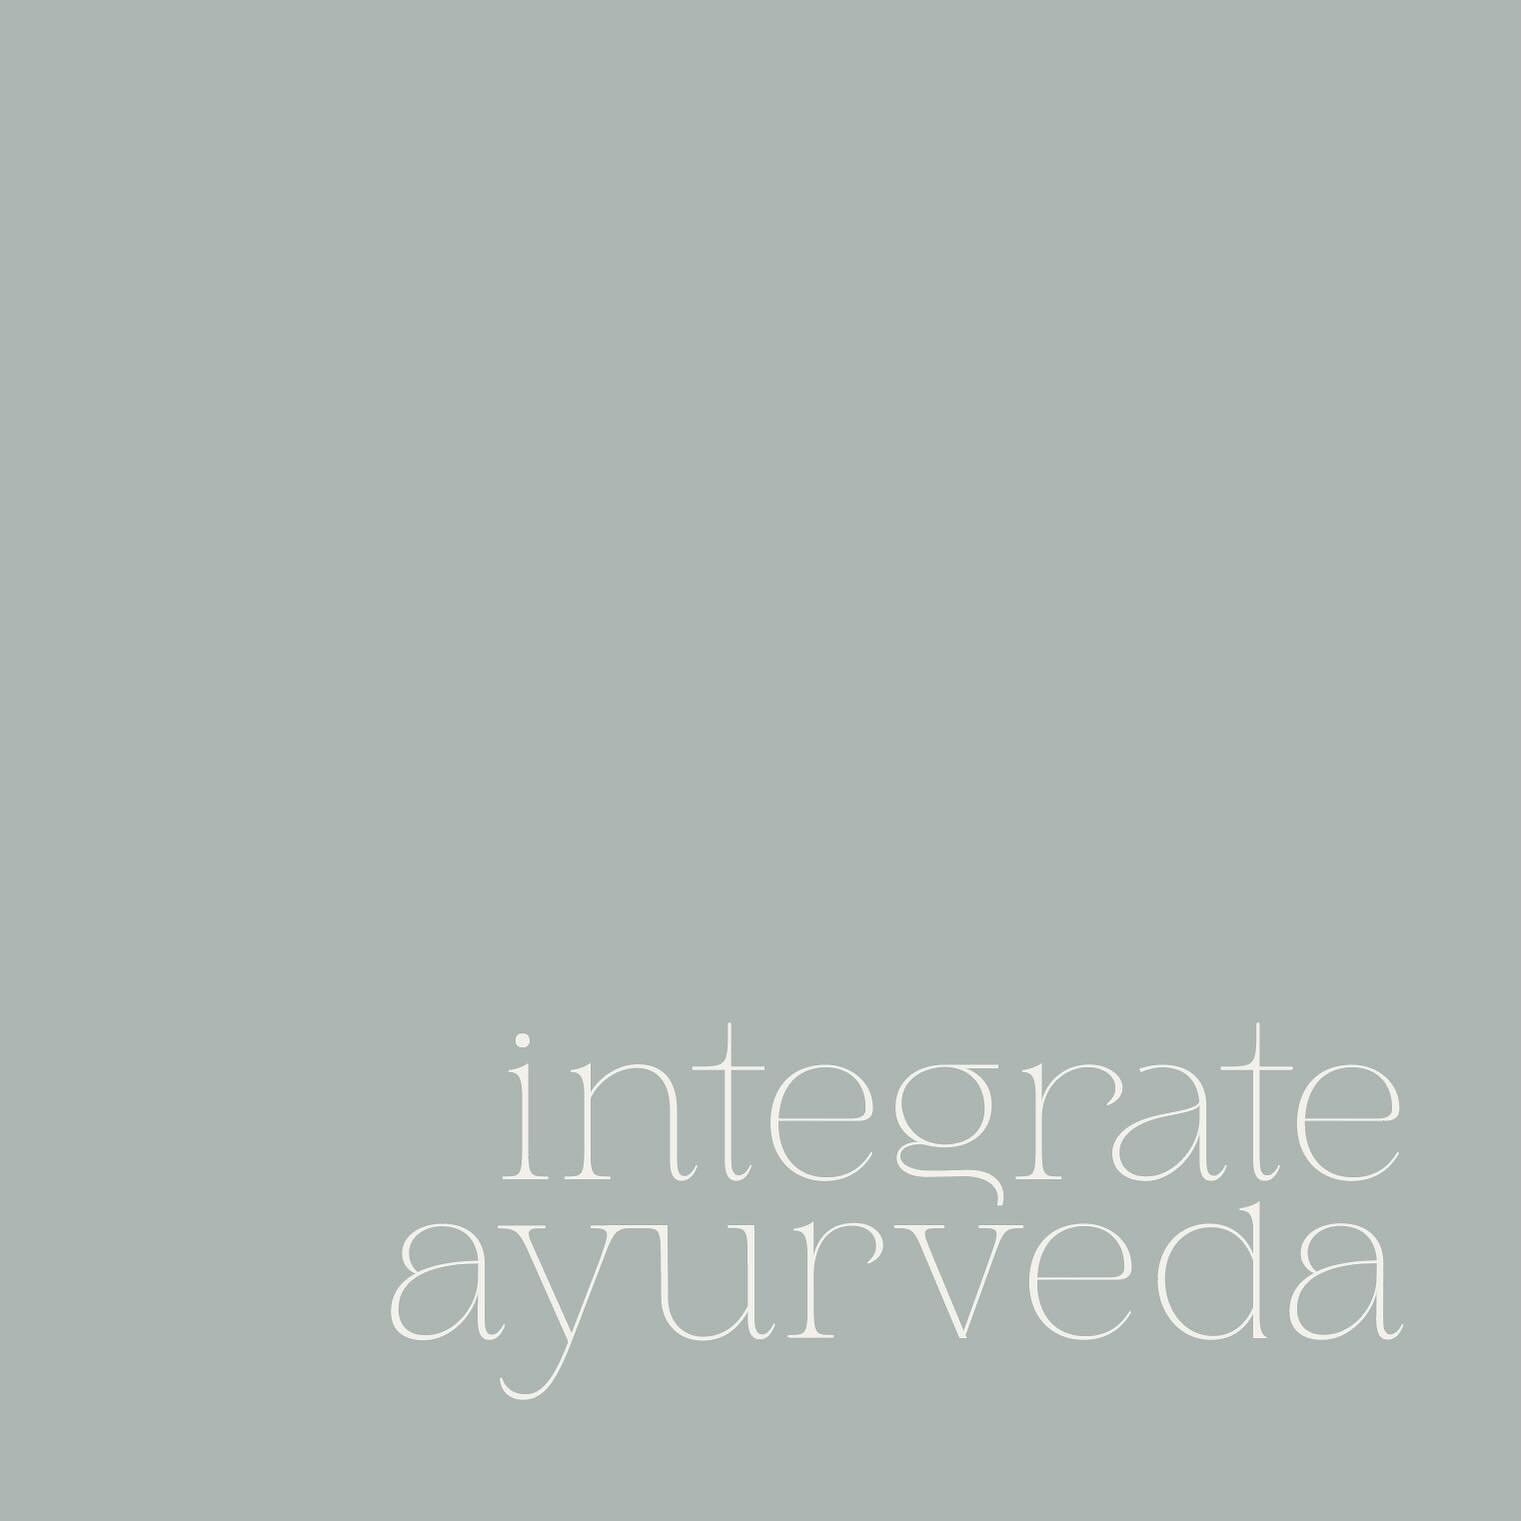 Introducing: Integrate Ayurveda - your personalized path to holistic wellbeing, routed in the ancient teachings of Ayurveda and Yoga. Follow along for more updates coming soon.
.
.
.
.
#ayurvedalife #integrateayurveda #ayurvedicliving #yogalifestyles